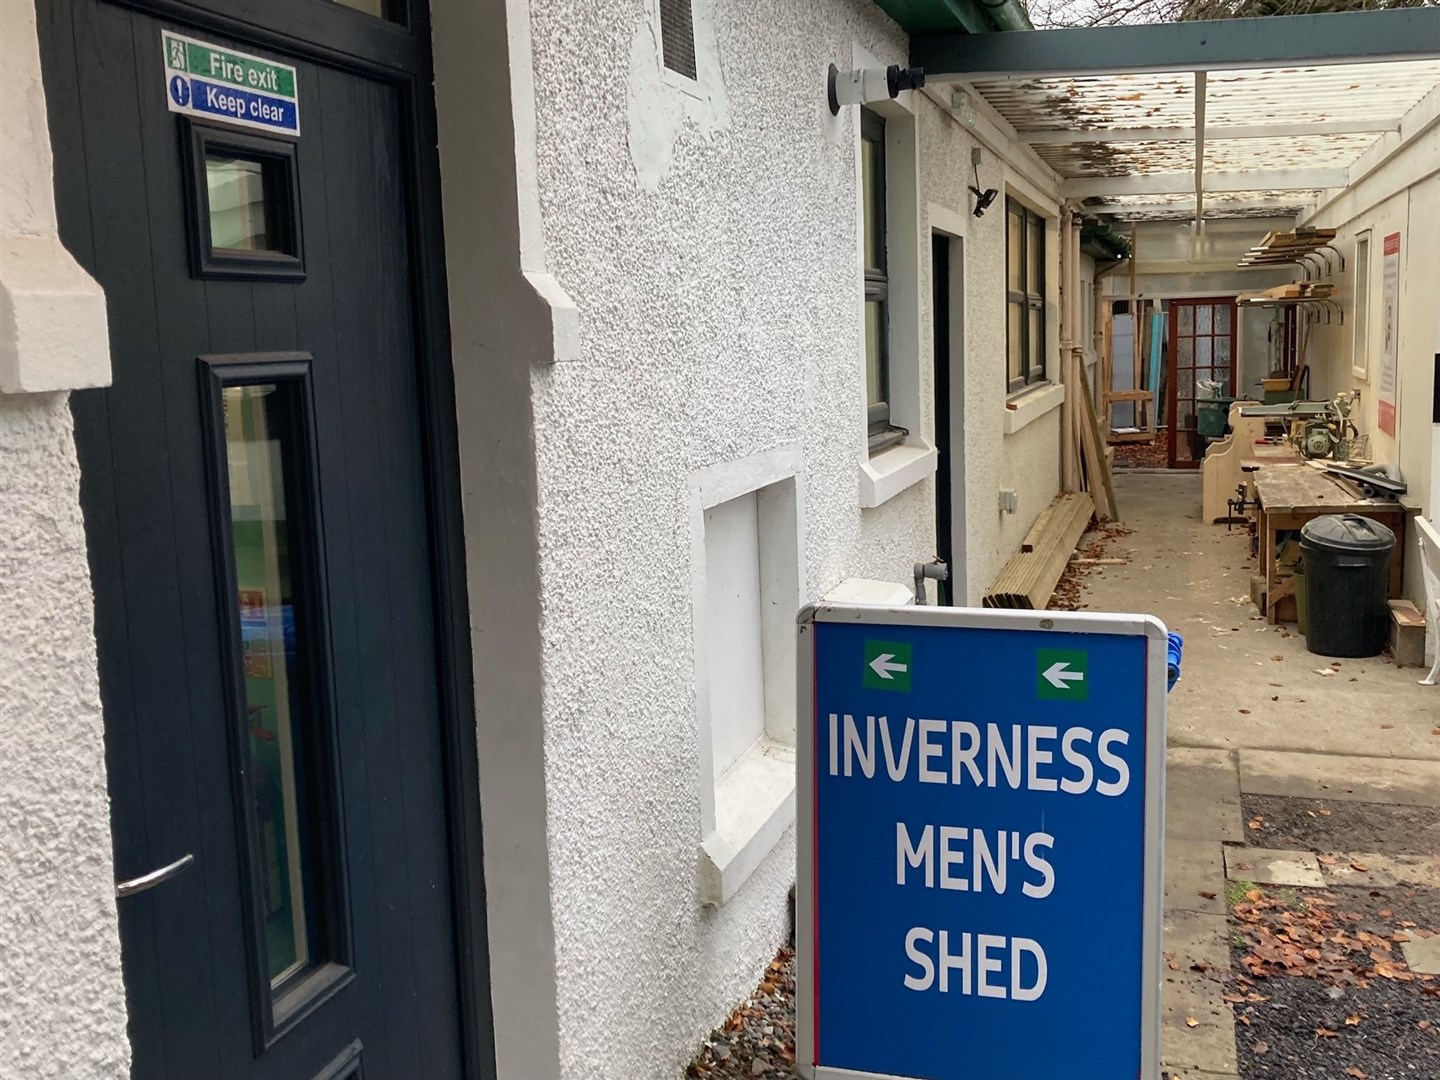 Men's Shed in Inverness.